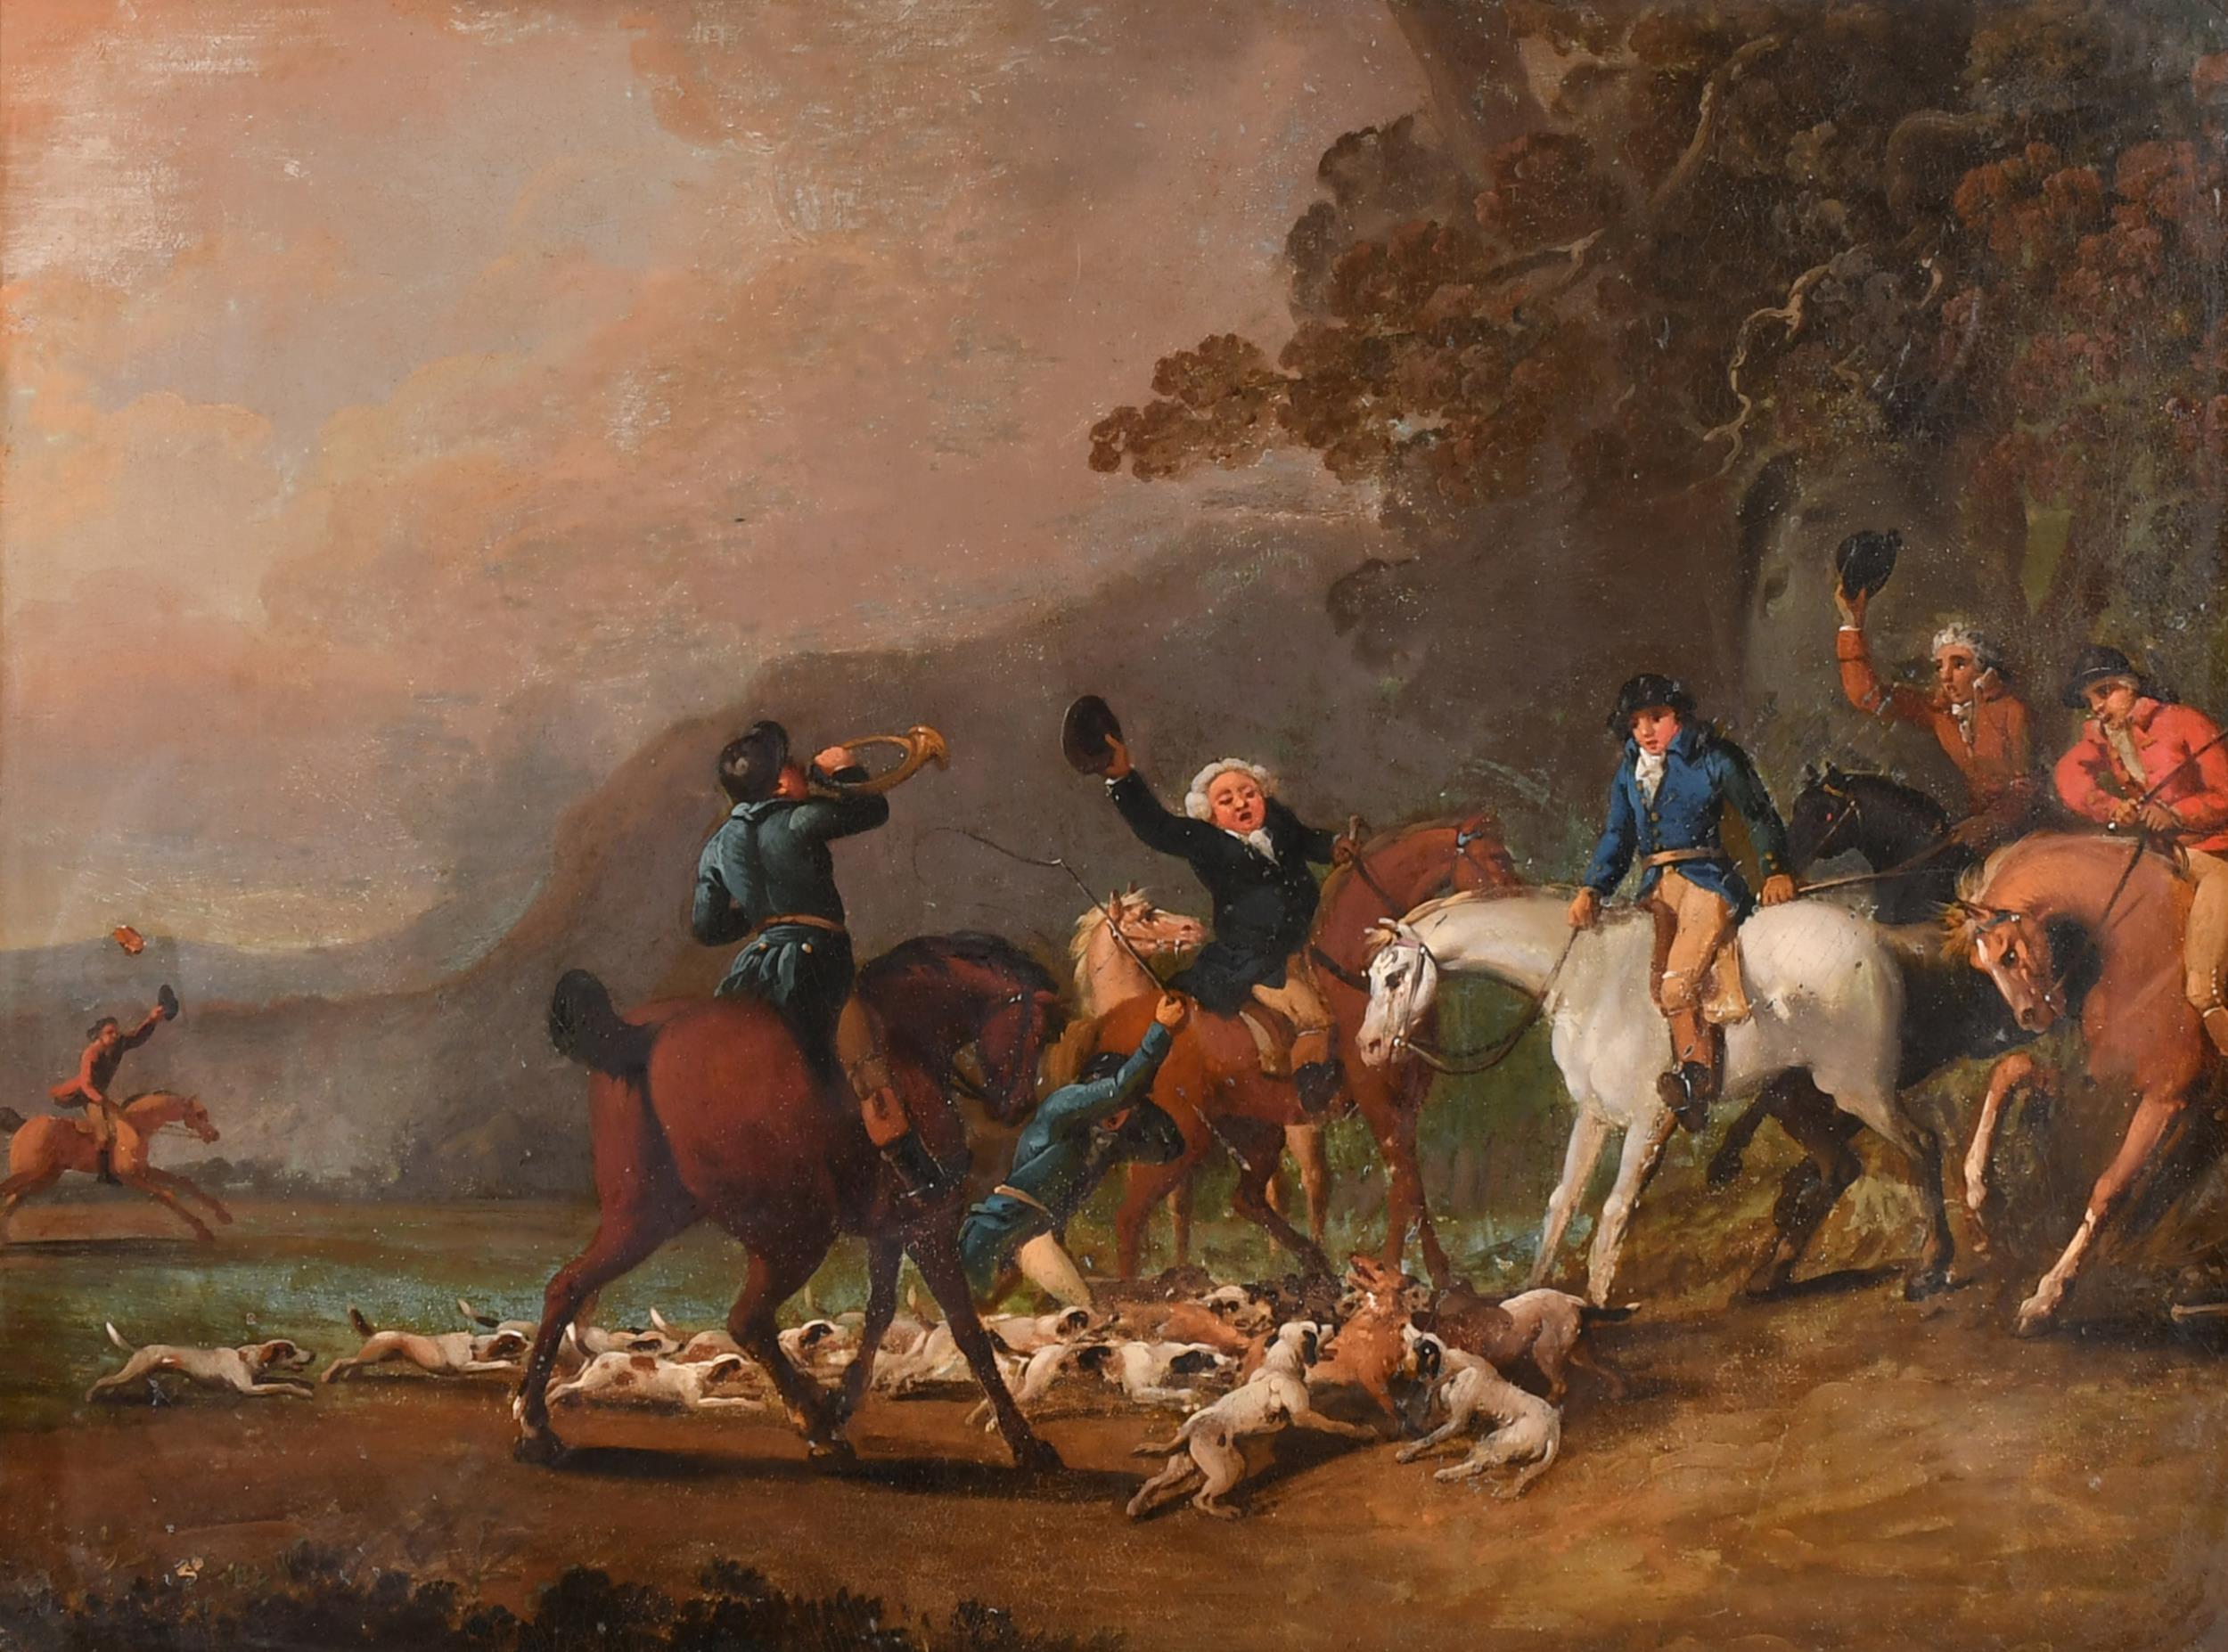 English Fox Hunting Scene
English School, 18th century
oil painting on metal, framed
painting size: 15.75 x 19.75 inches
framed: 22 x 26 inches
condition: very good and presentable
provenance: private UK collection